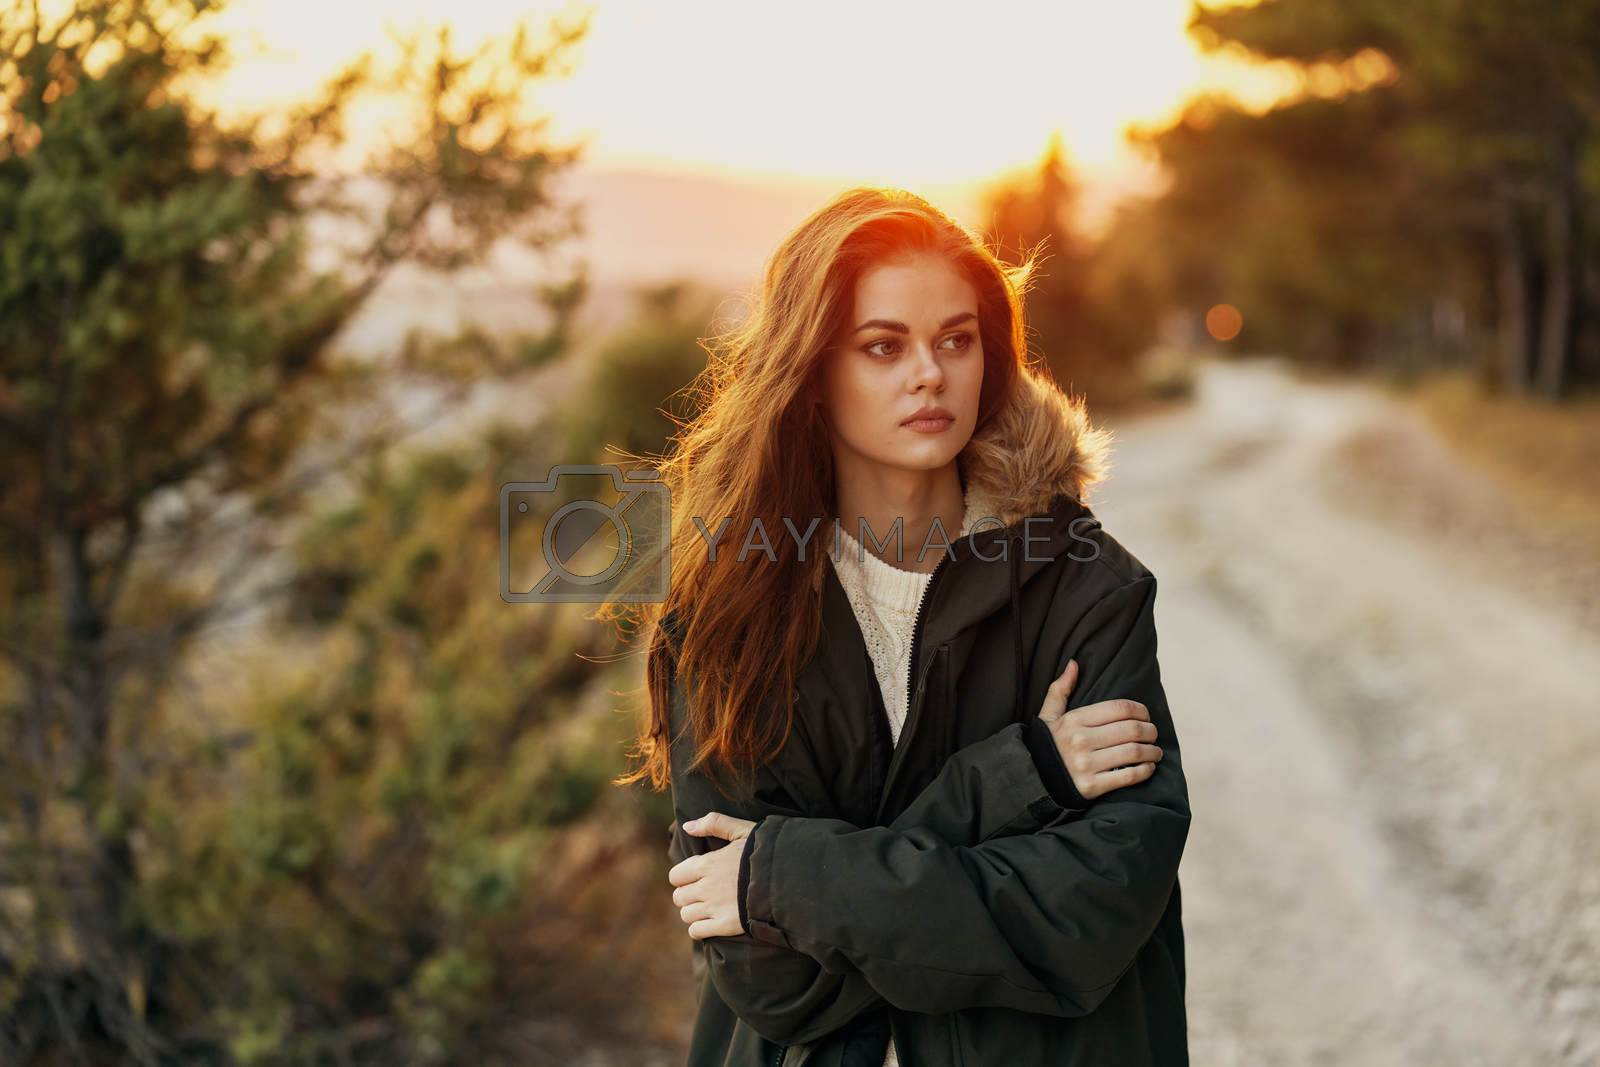 Woman on nature walk cool autumn travel. High quality photo